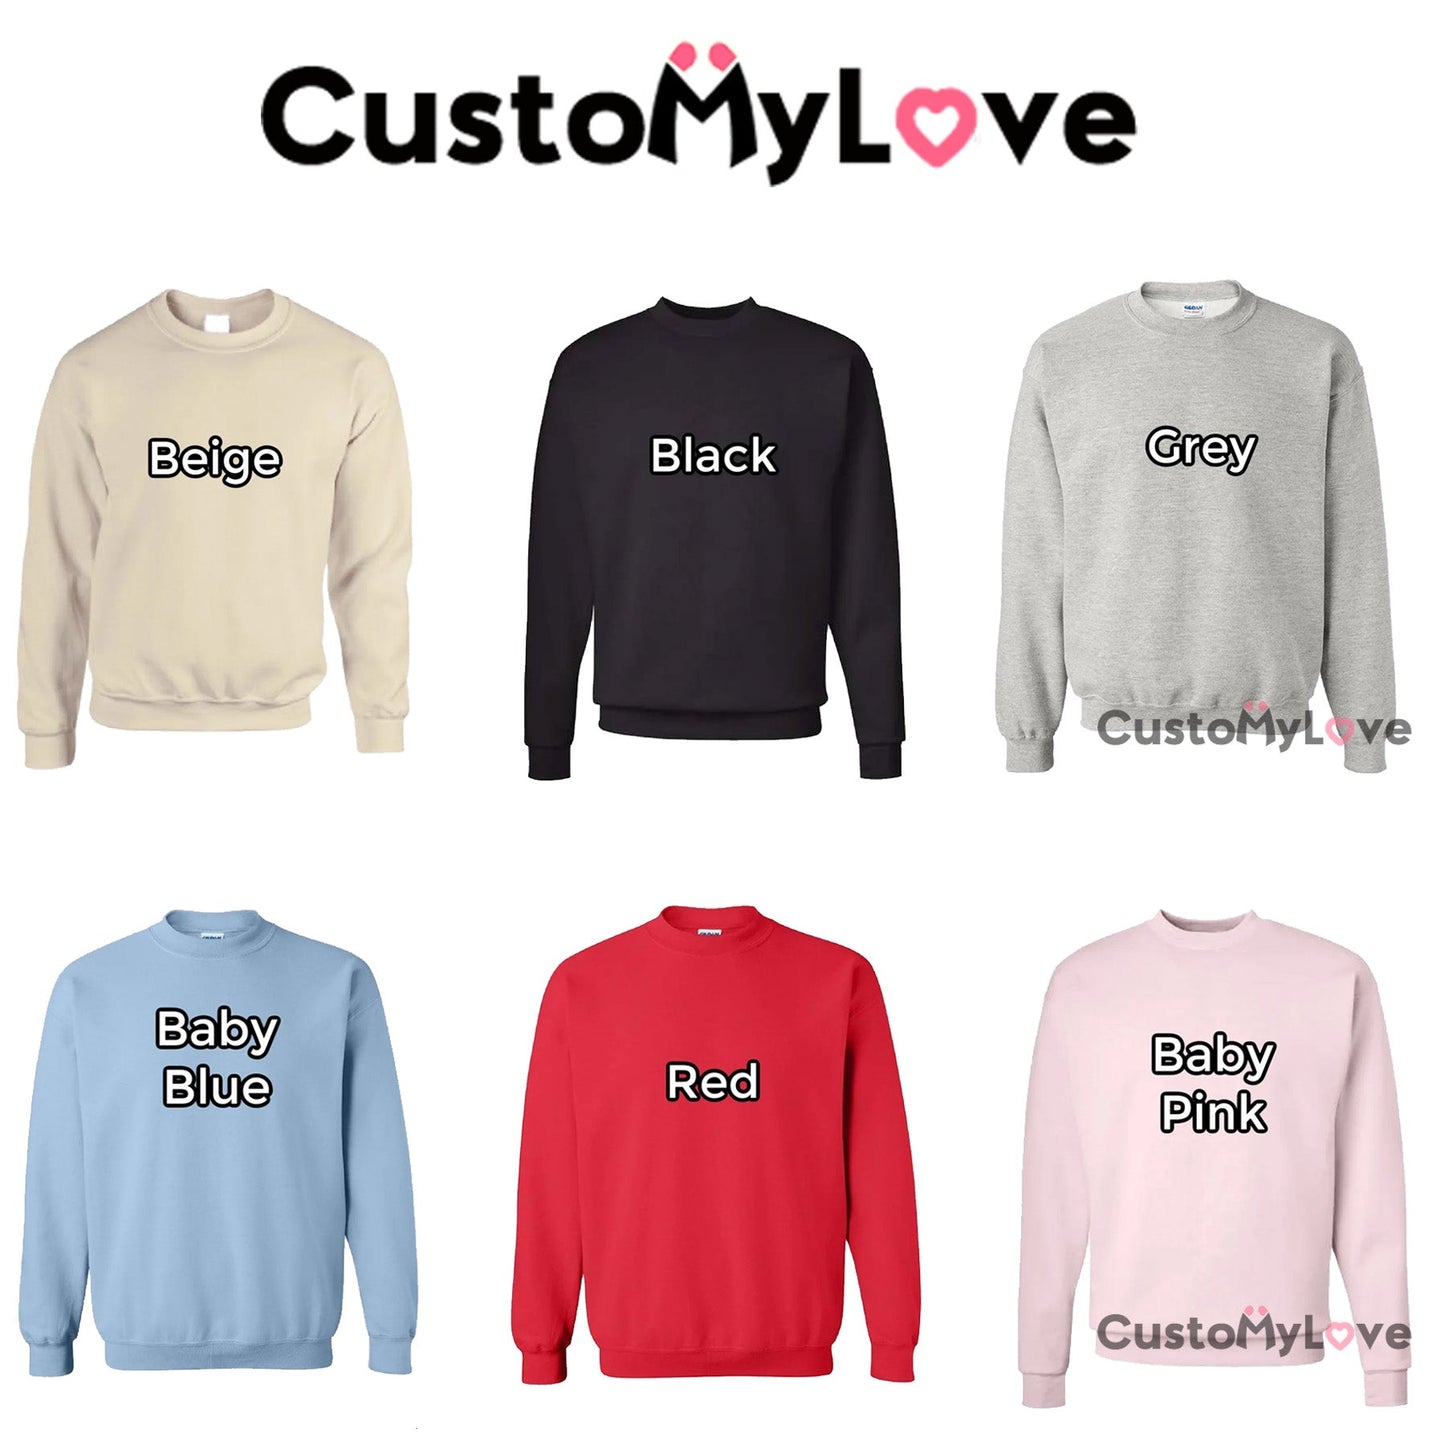 💝PERSONALIZED PHOTO LINE DRAWING HOODIE ♥ CREWNECK